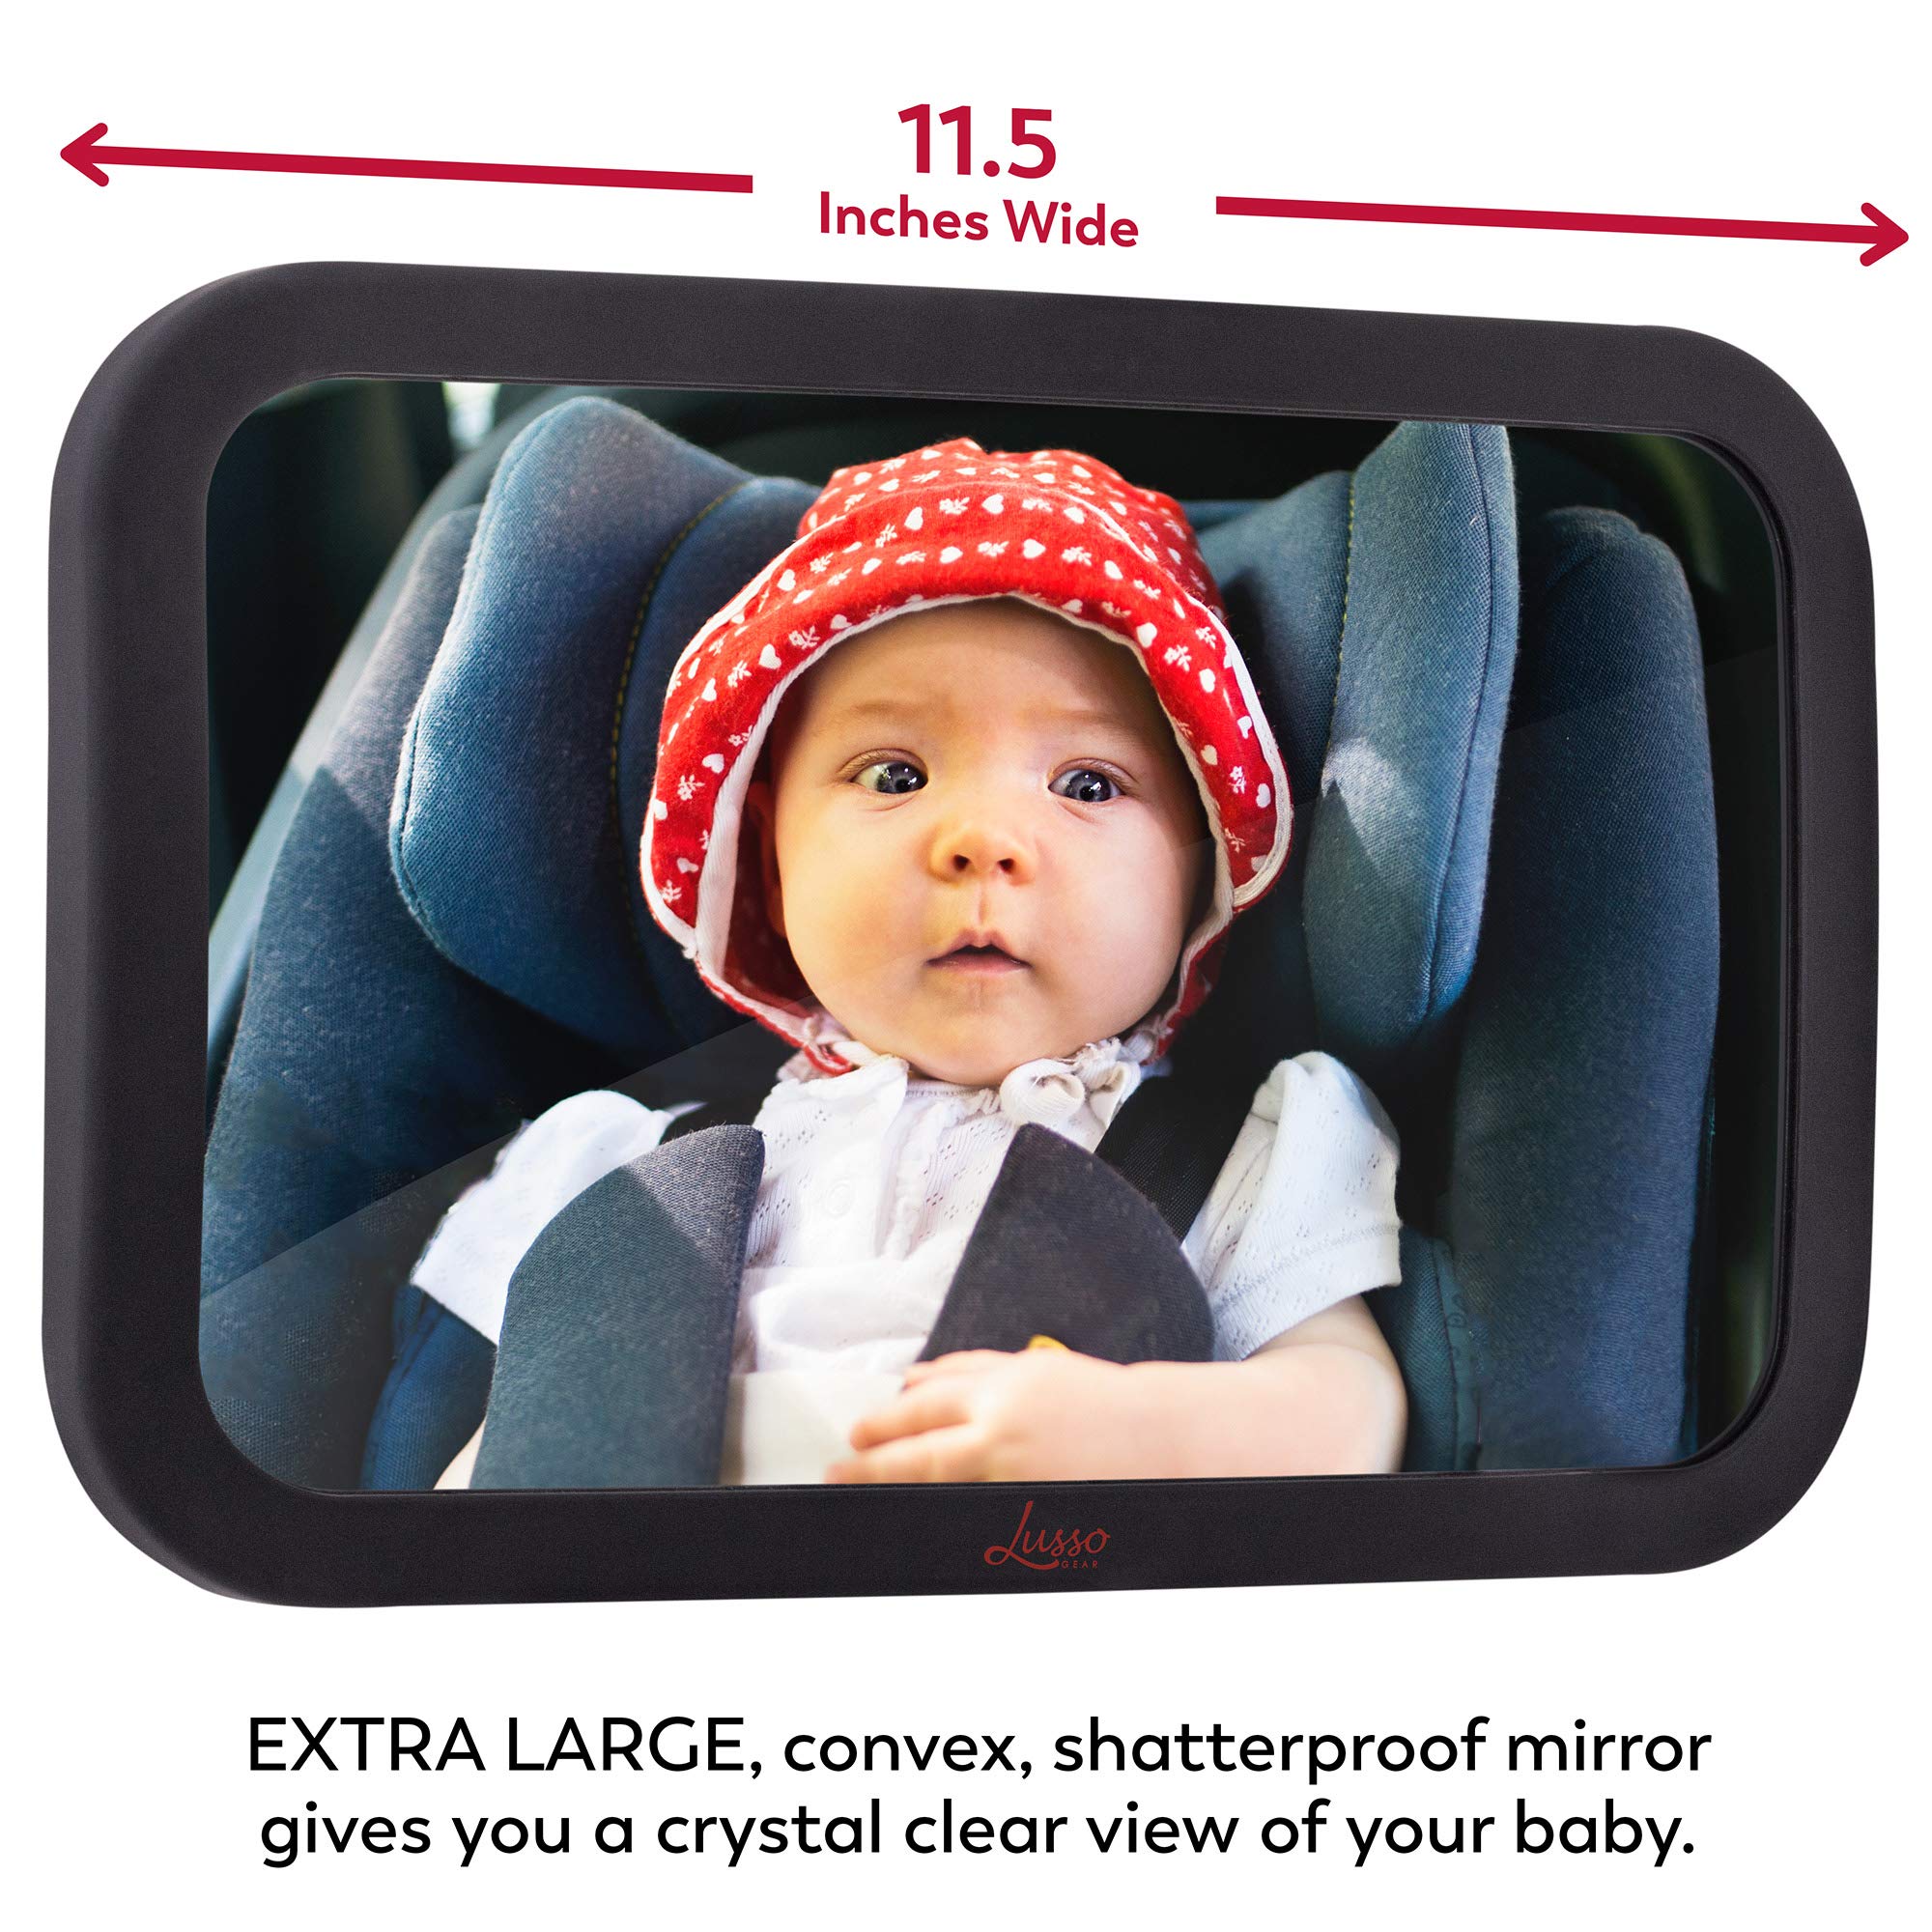 Lusso Gear Car Seat Protector (Black) + Baby Backseat Mirror for Car (Black), Waterproof, Protects Fabric or Leather Seats, Premium Oxford Fabric, Travel Essentials